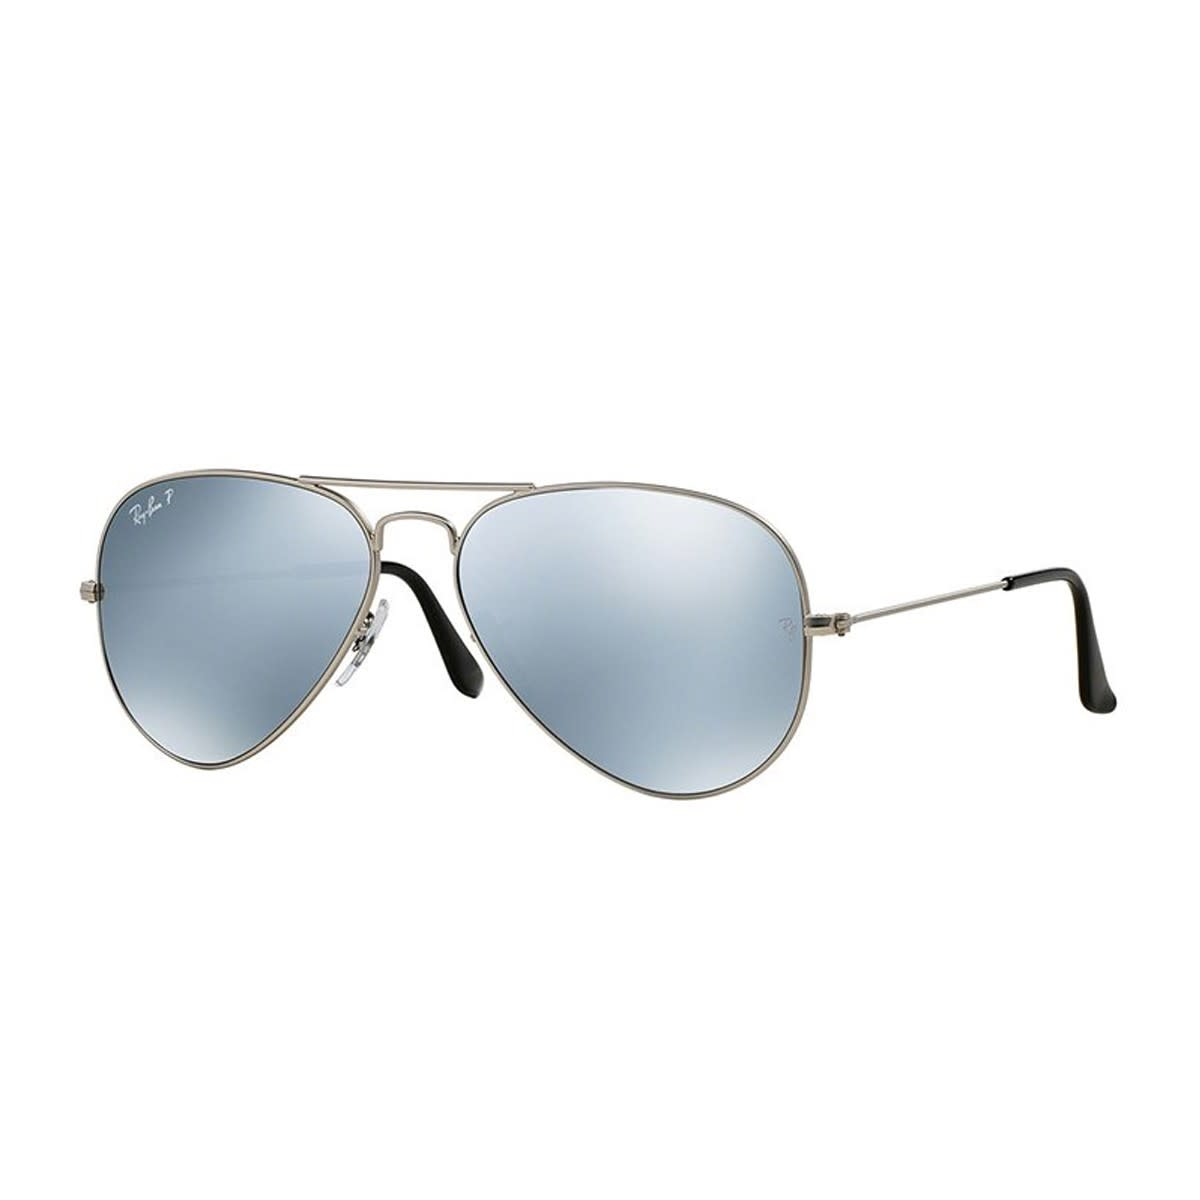 Ray Ban 3025 Sole Sunglasses In Argento